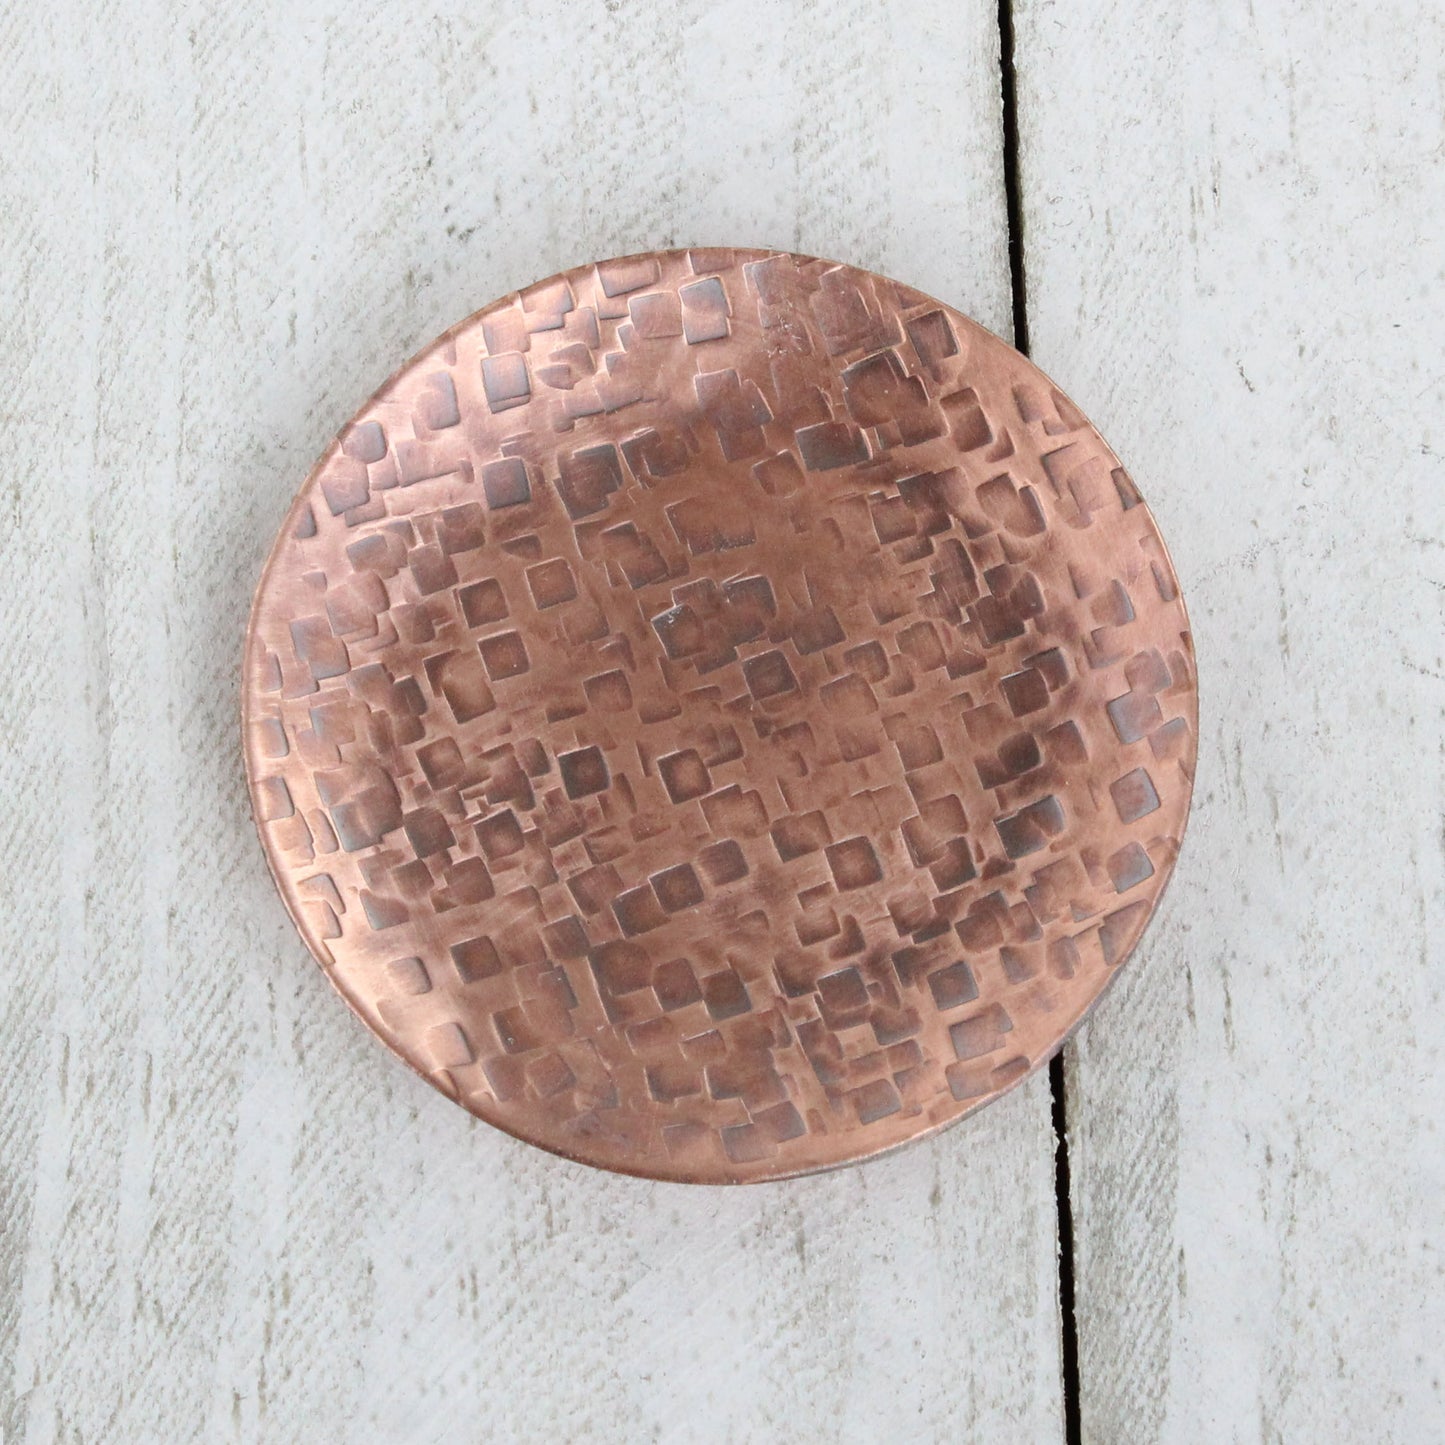 Small copper ring dish for rings, jewelry, and trinkets. Hammered texture pattern, the pattern is random small squares. Slightly raised edges form a shallow bowl.